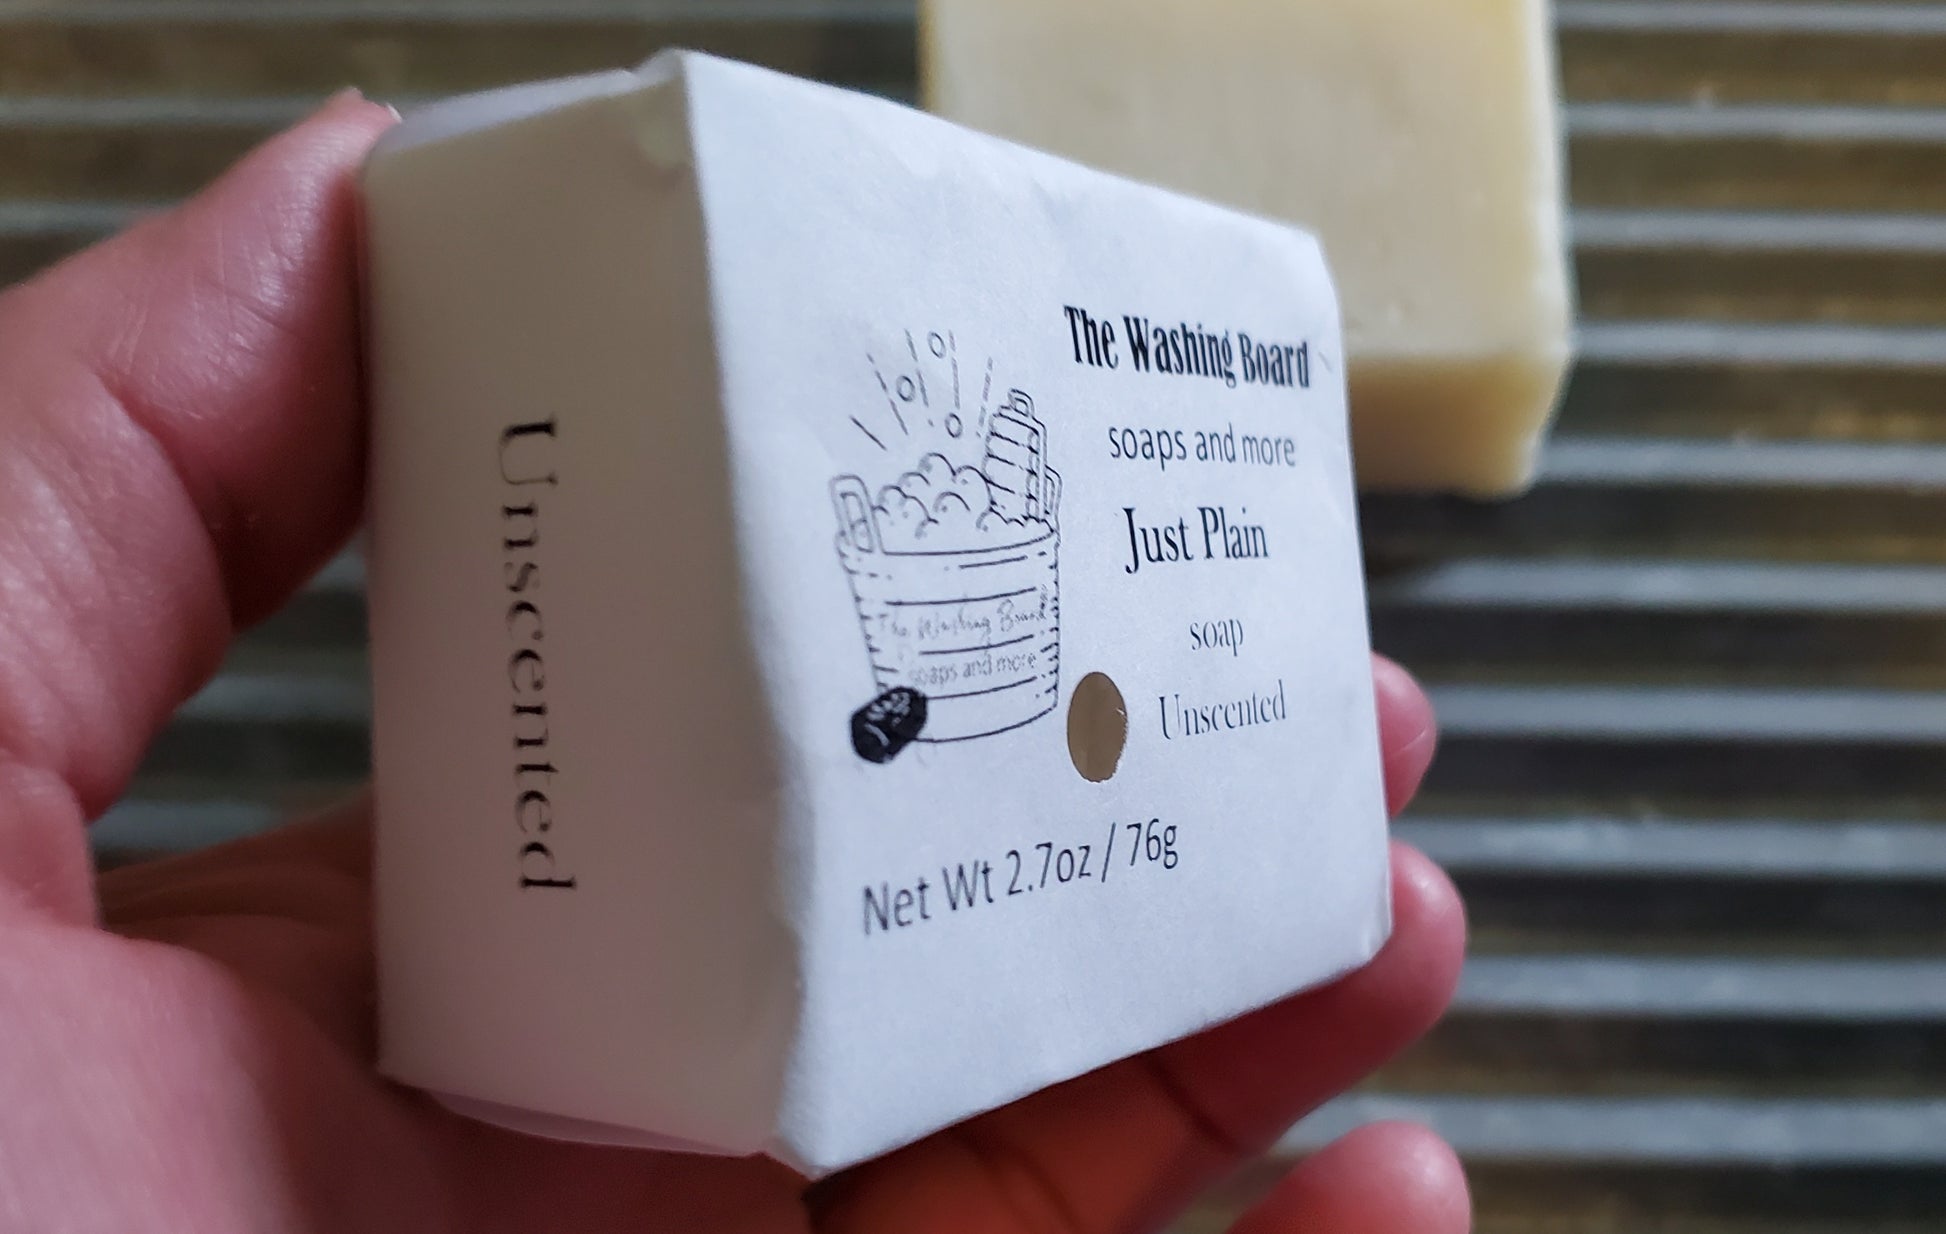 Just Plain soap shown in eco friendly packaging on an angle in a woman's hand. 